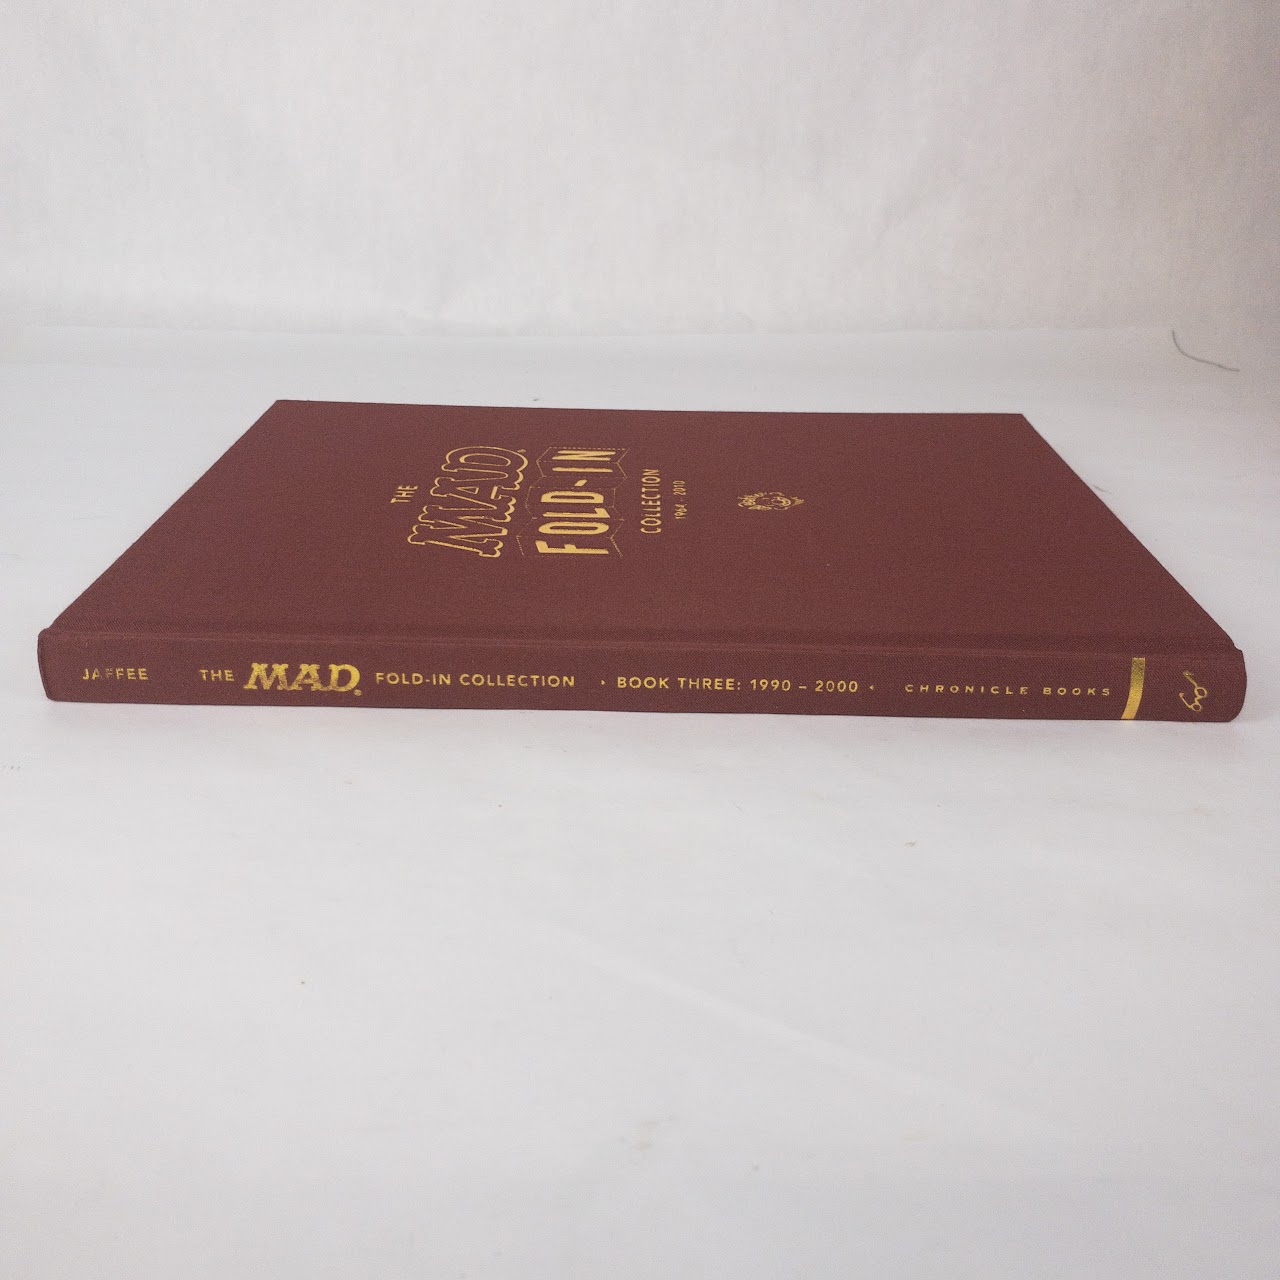 'The Mad Fold-In Collection 1964-2010' Book Set